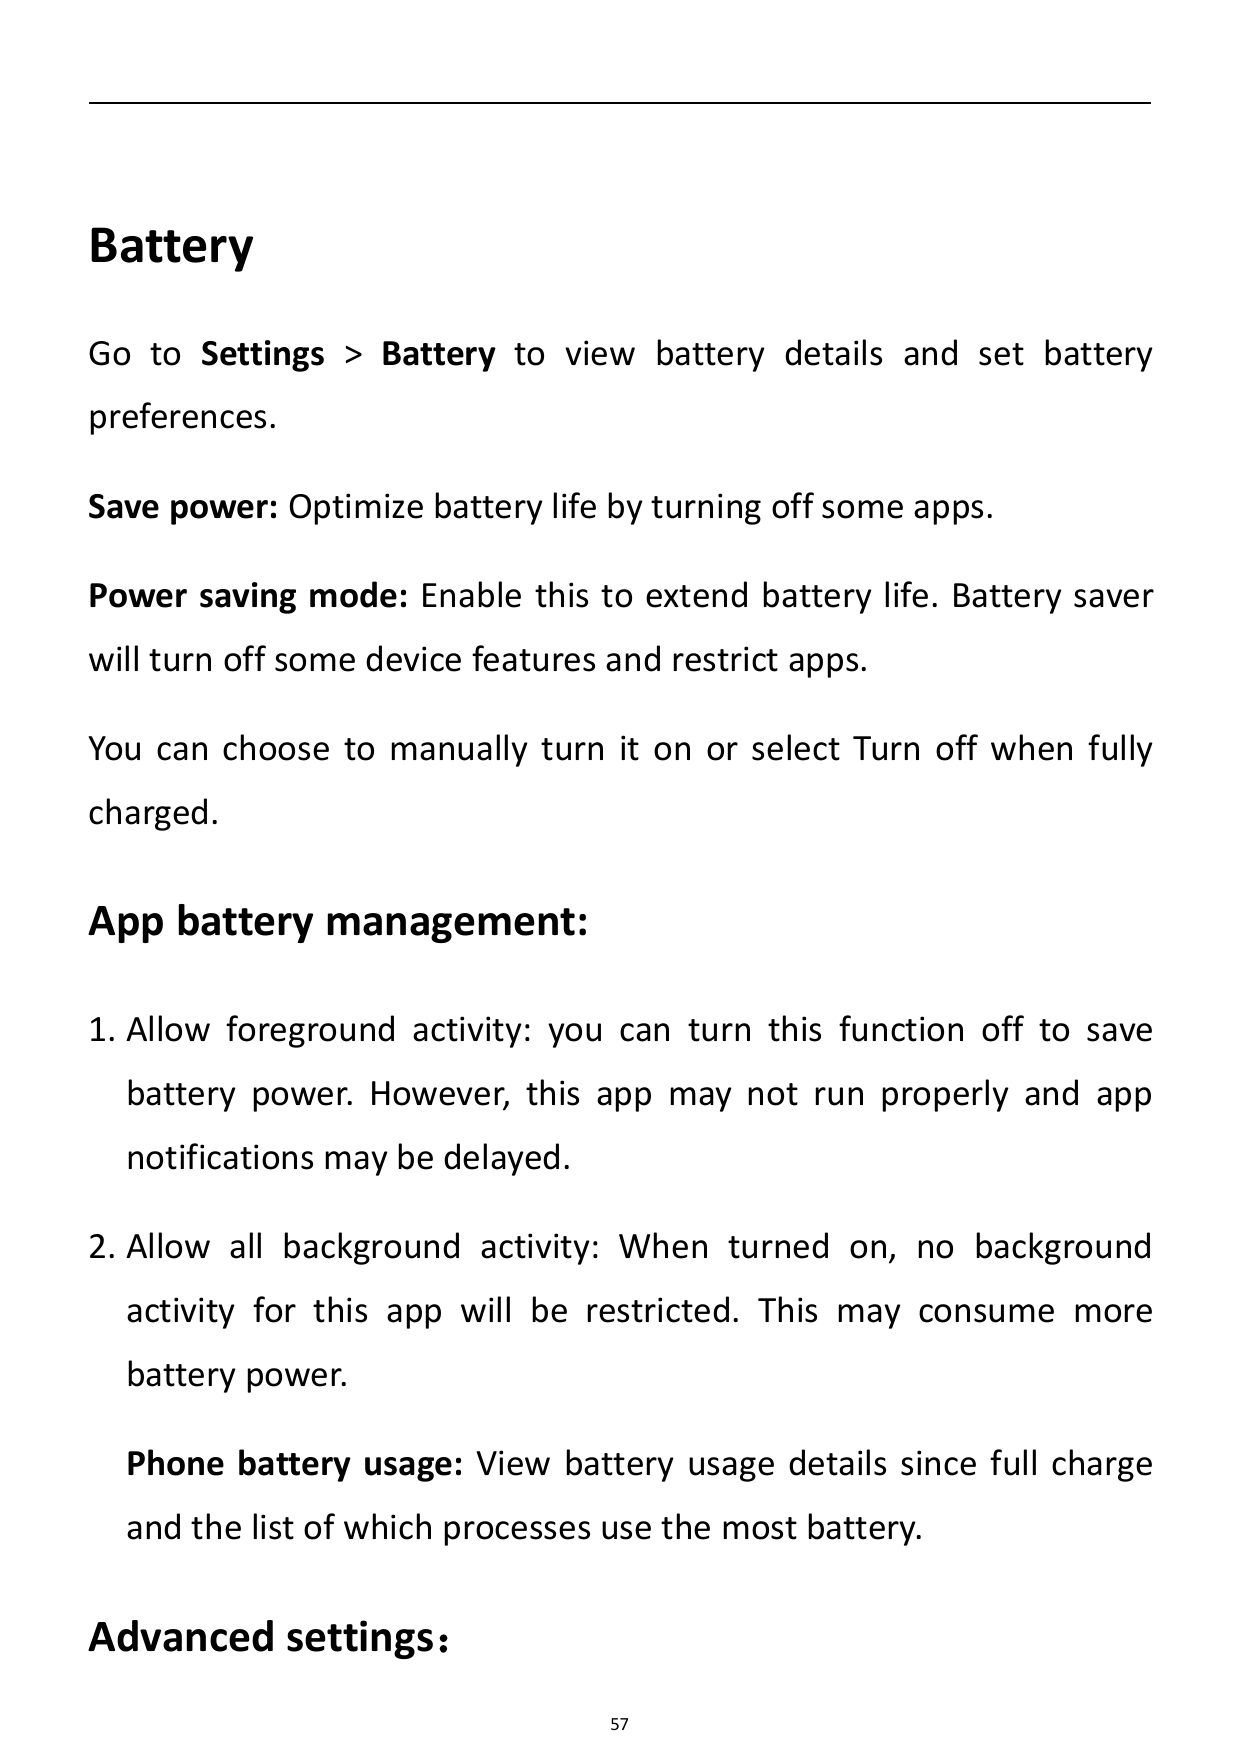 BatteryGo to Settings > Battery to view battery details and set batterypreferences.Save power: Optimize battery life by turning 